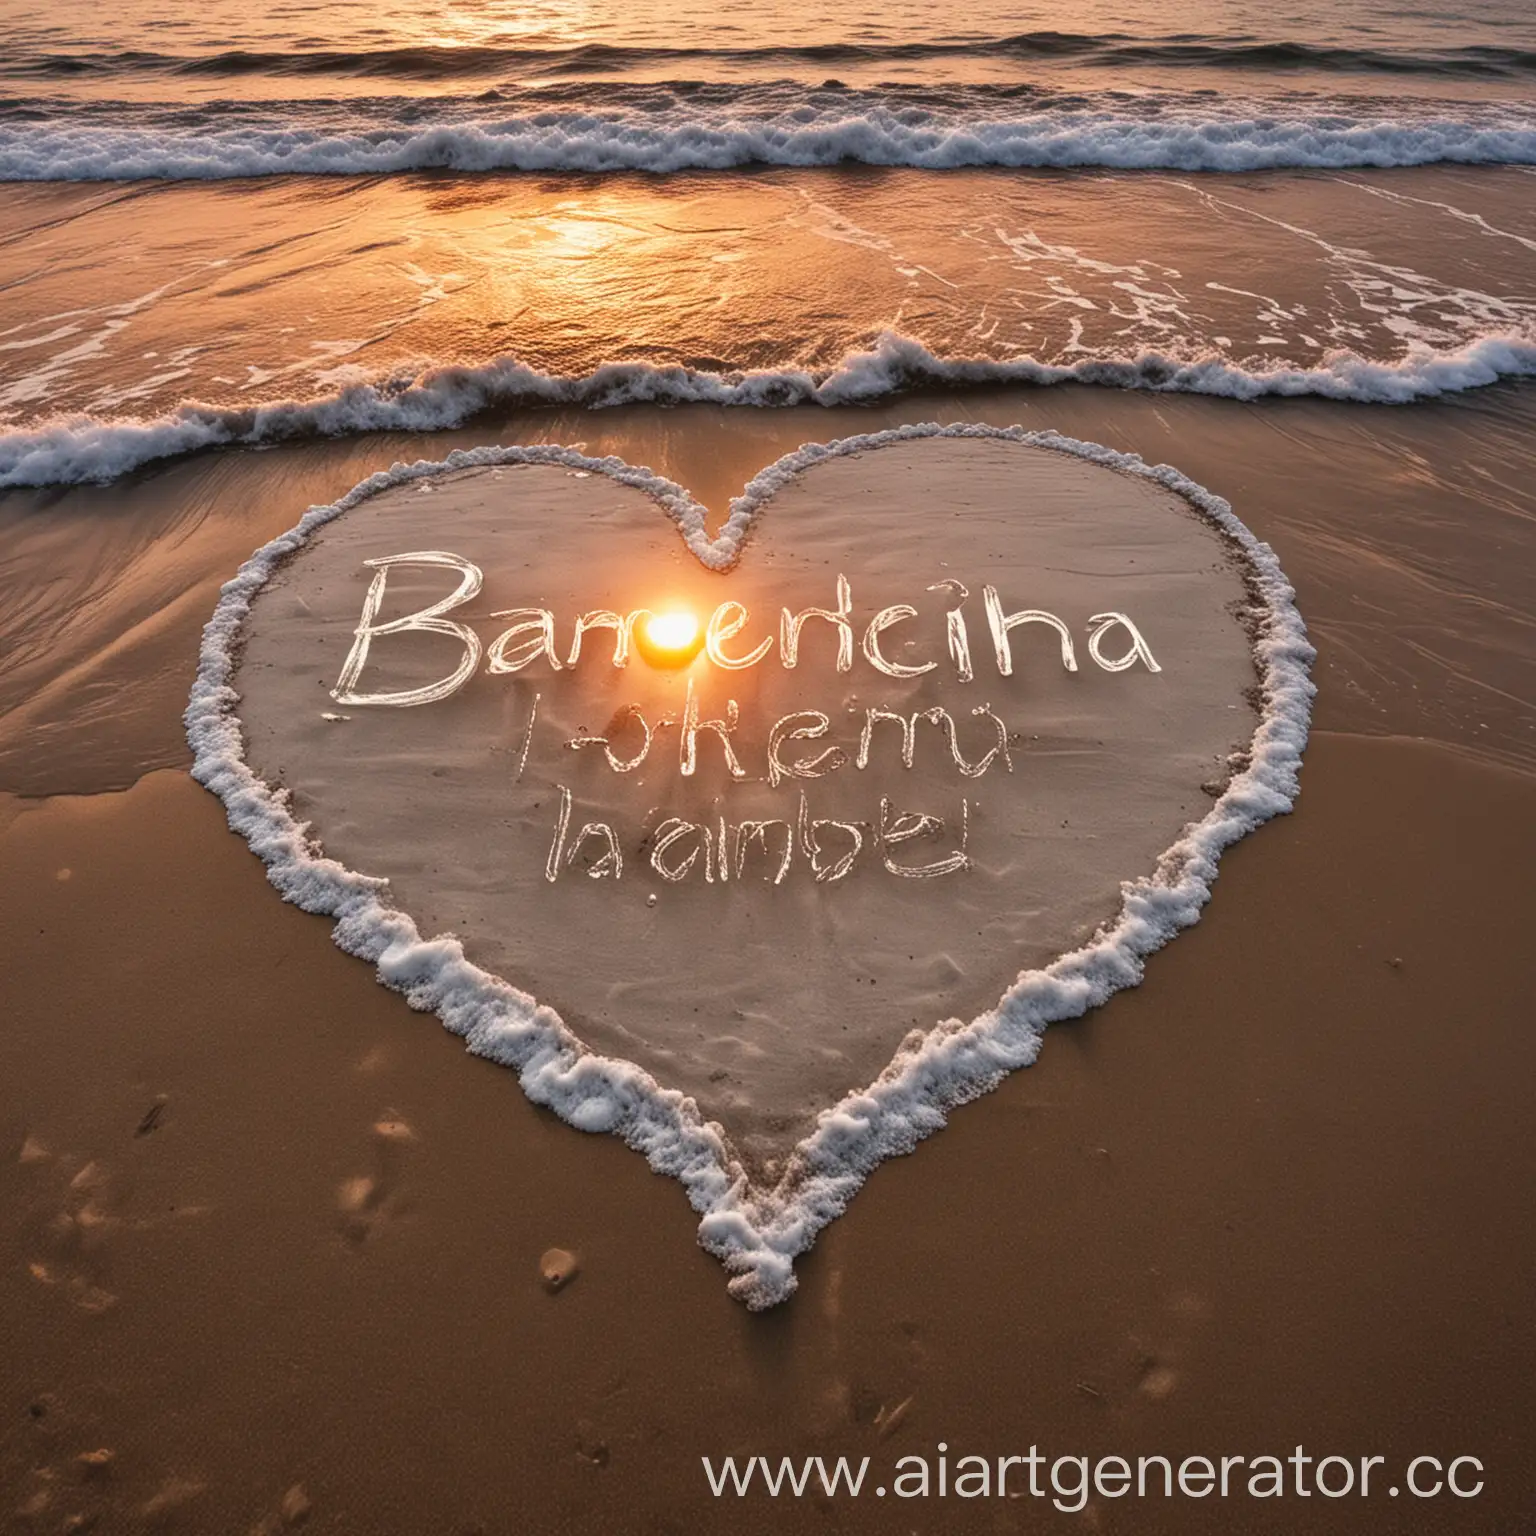 Tranquil-Beach-Sunset-with-Inscription-in-Heart-Shape